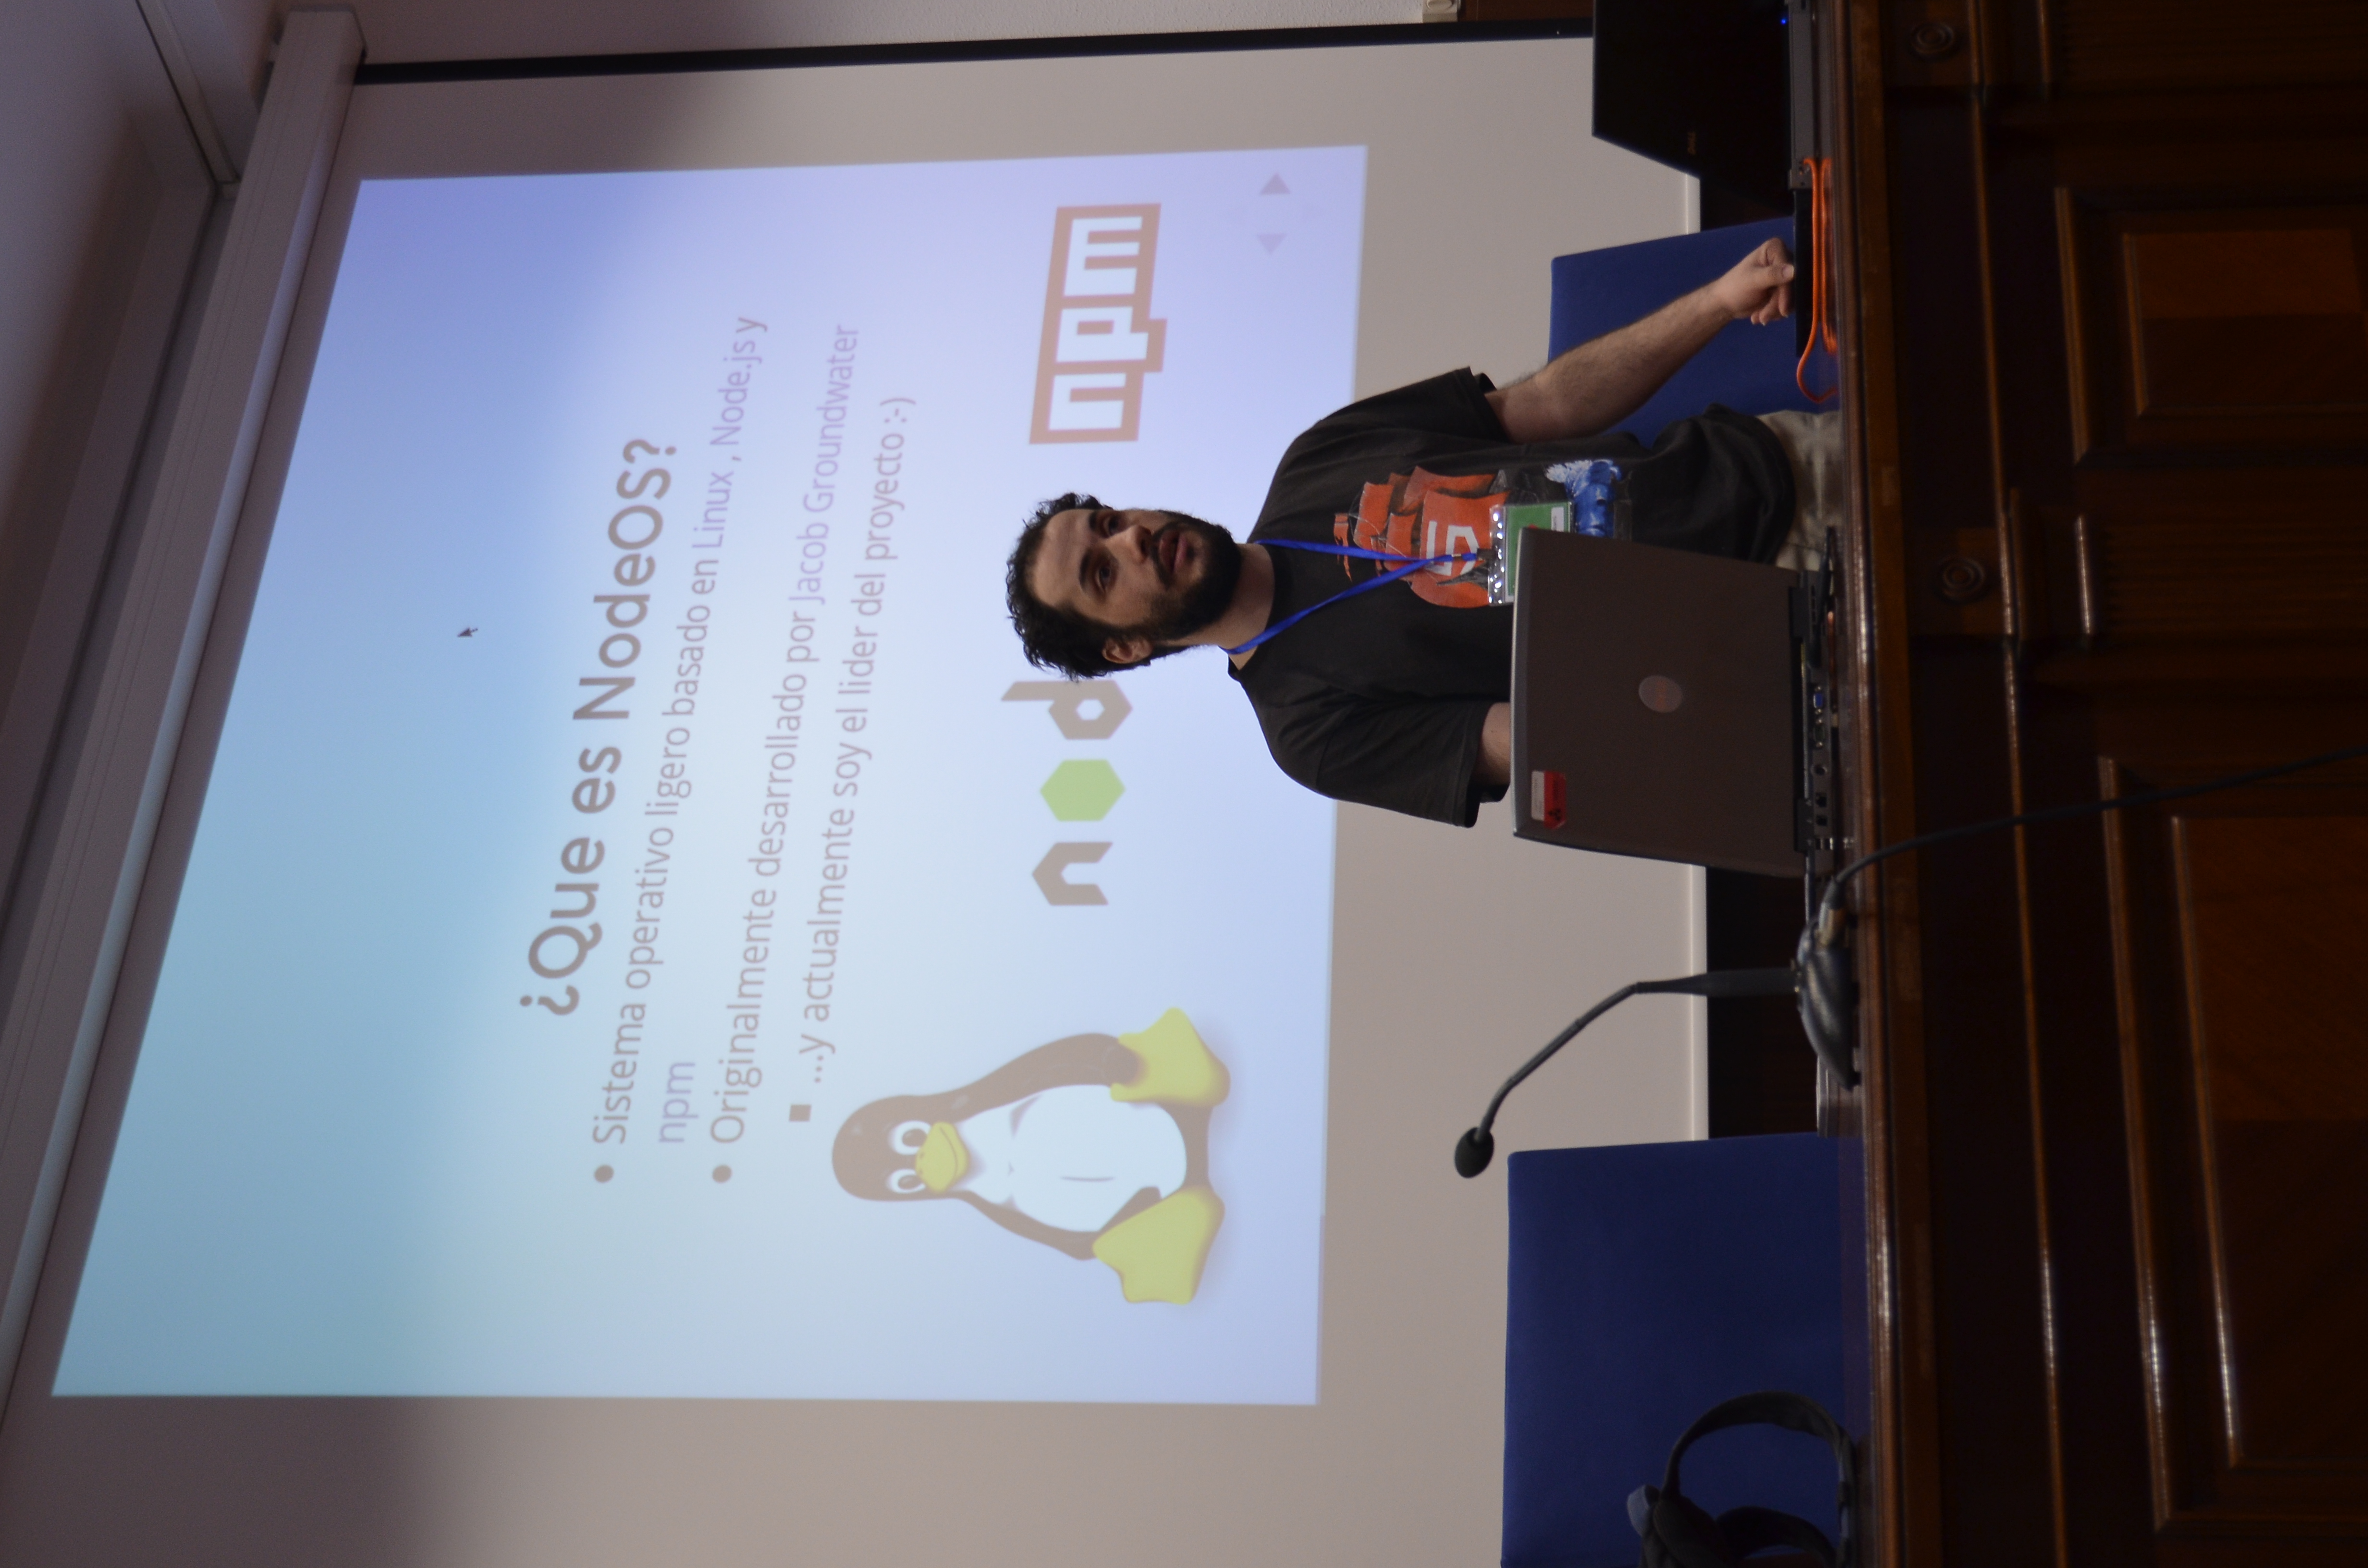 Jesús Leganés Combarro presenting his NodeOS project in the Final Phase of the IX Free Software University Contest